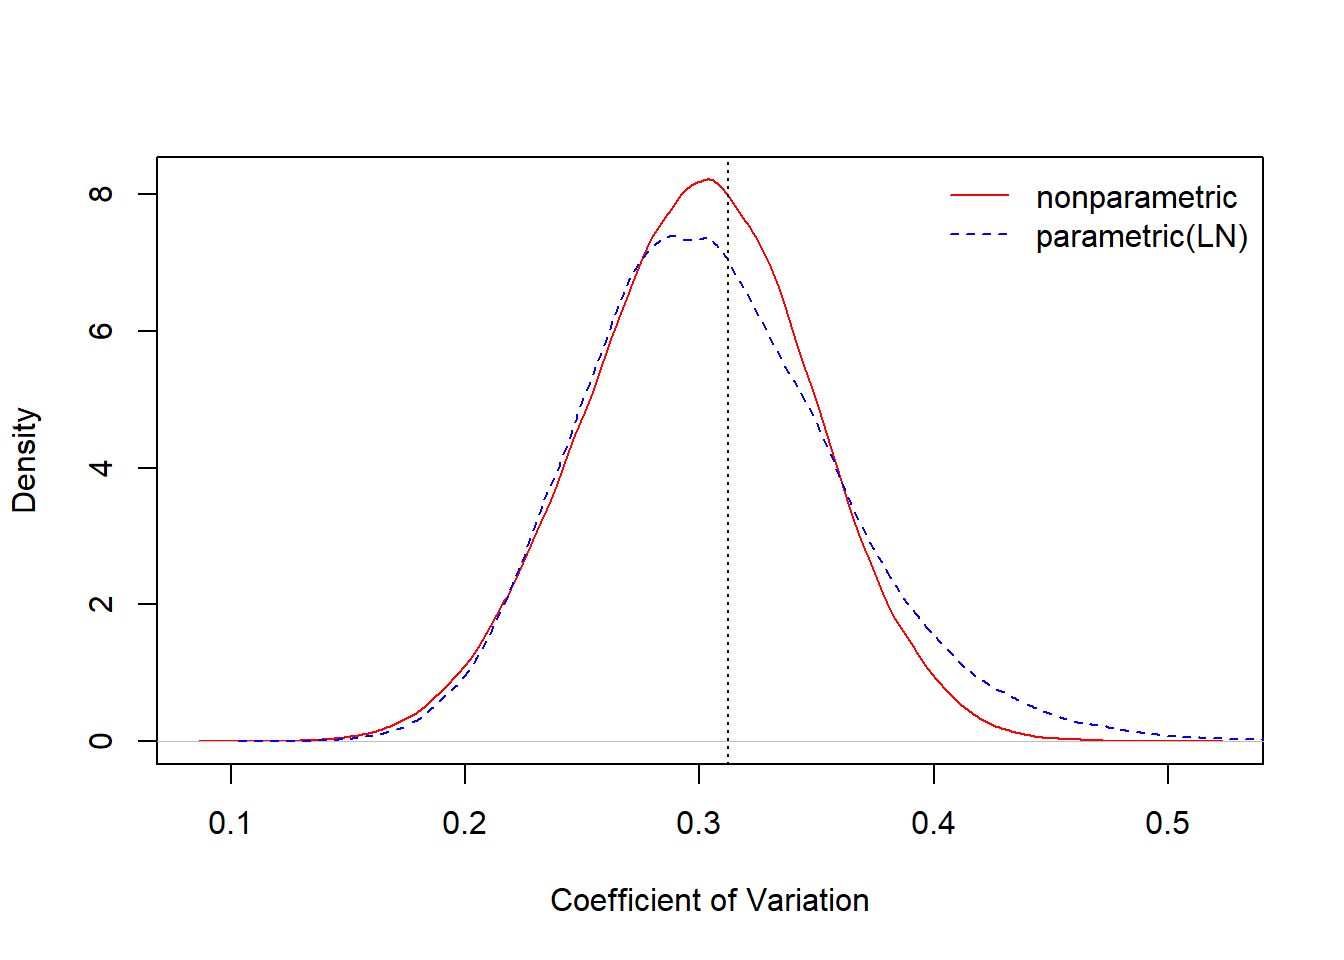 Comparision of Nonparametric and Parametric Bootstrap Distributions for the Coefficient of Variation